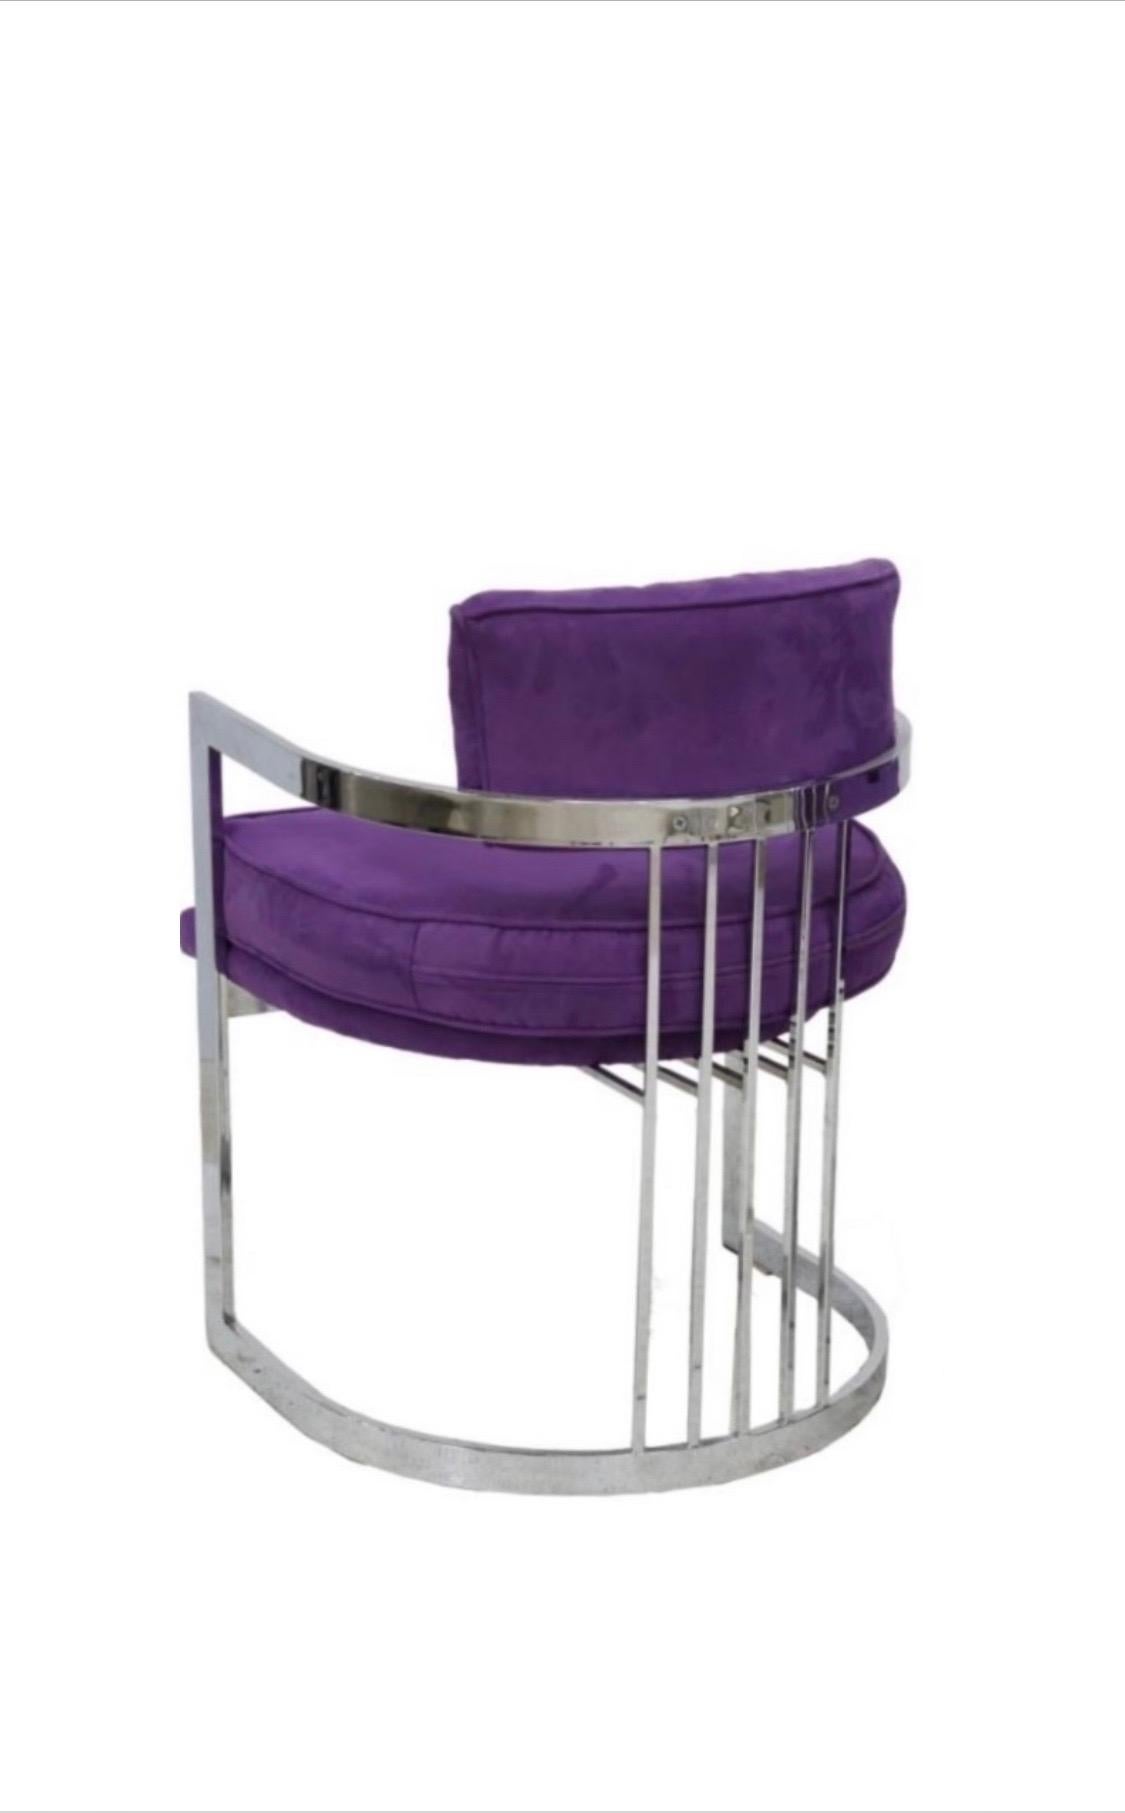 Hand-Crafted 4 Milo Baughman Chrome Chairs in Purple Upholstery  For Sale